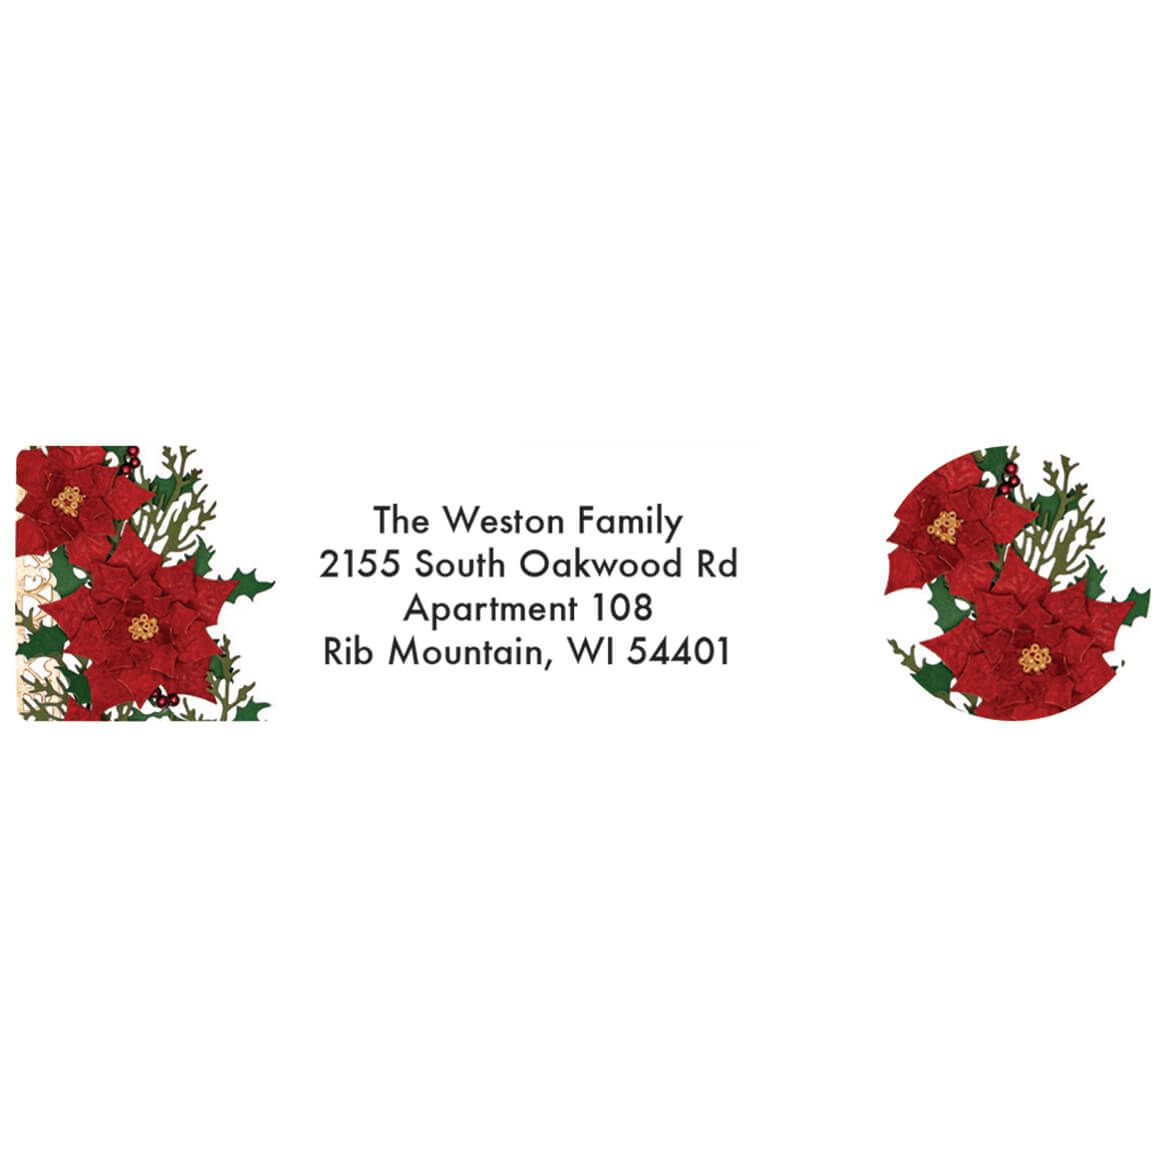 Personalized Poinsettia Collage Labels and Envelope Seals 20 + '-' + 370163